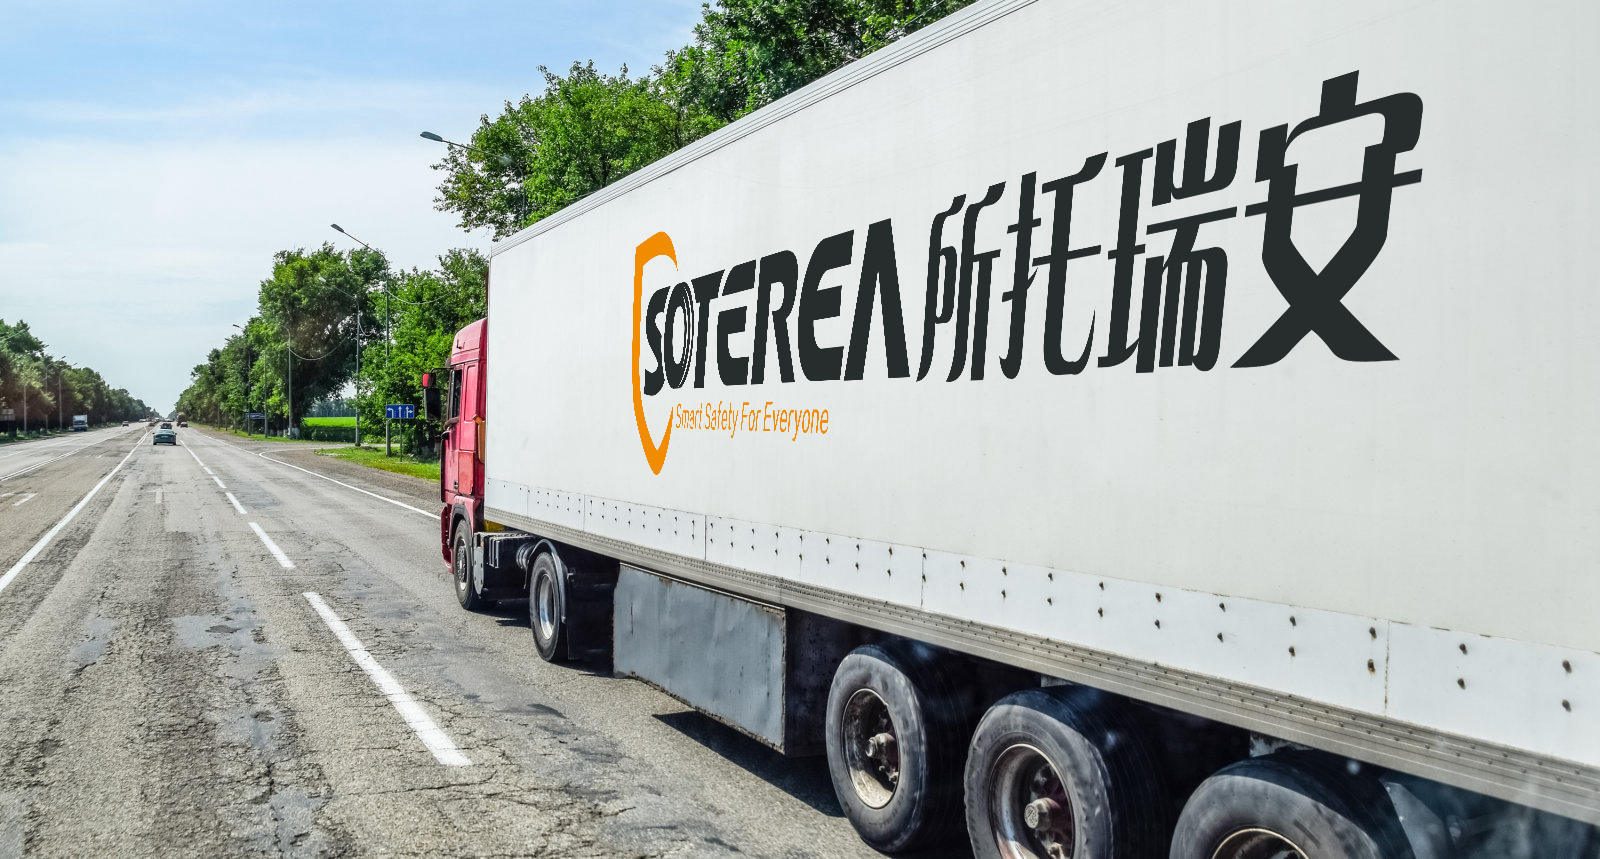 Ping An Capital leads $204m funding in intelligent driving safety startup Soterea